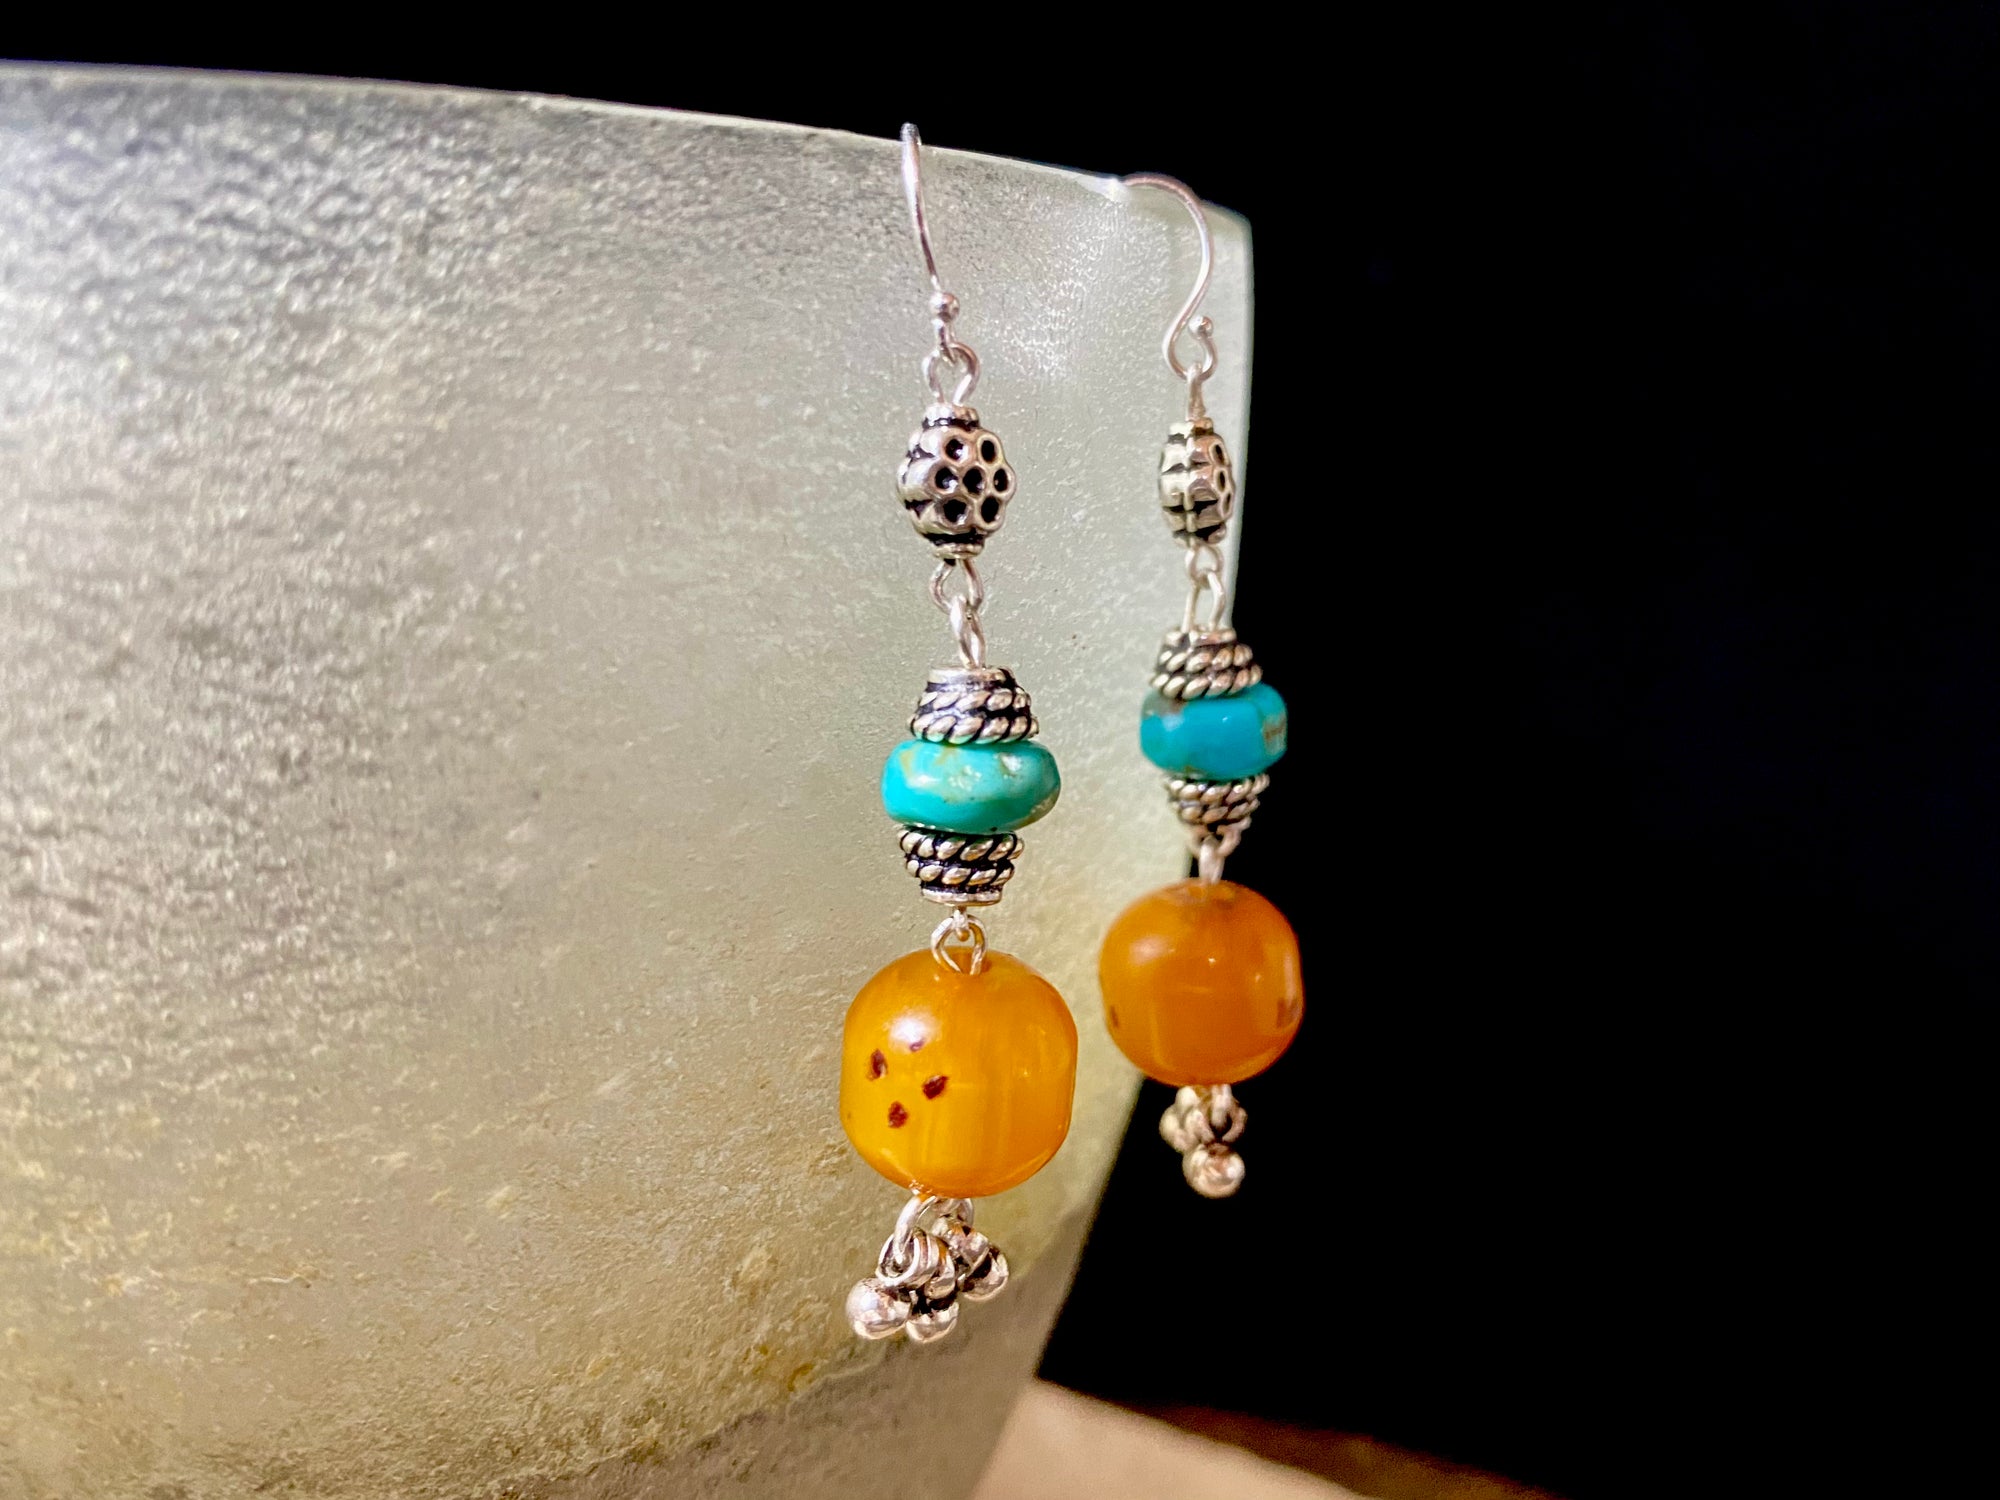 These exotic earrings were created from vintage copal amber beads topped with Arizona turquoise and handmade sterling silver beads, finished with sterling silver hooks.These are a one-off earring design that are very light and easy to wear. Length 5.8 cm including hook